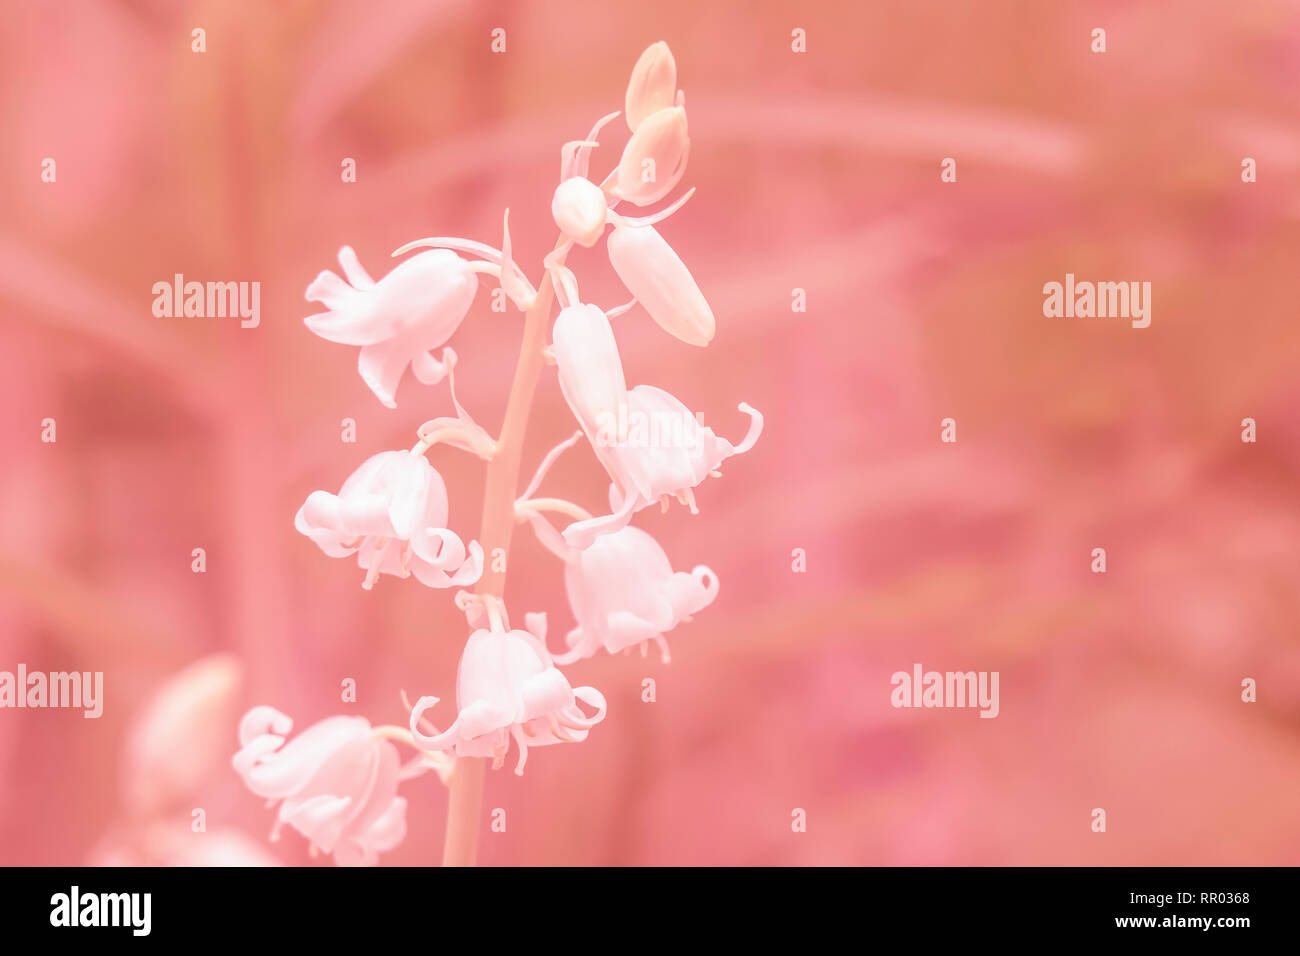 White wildflowers with bell shaped petals on blurred living coral background.Soft, dreamy nature image with copy space.Bright,vibrant photo of flower Stock Photo